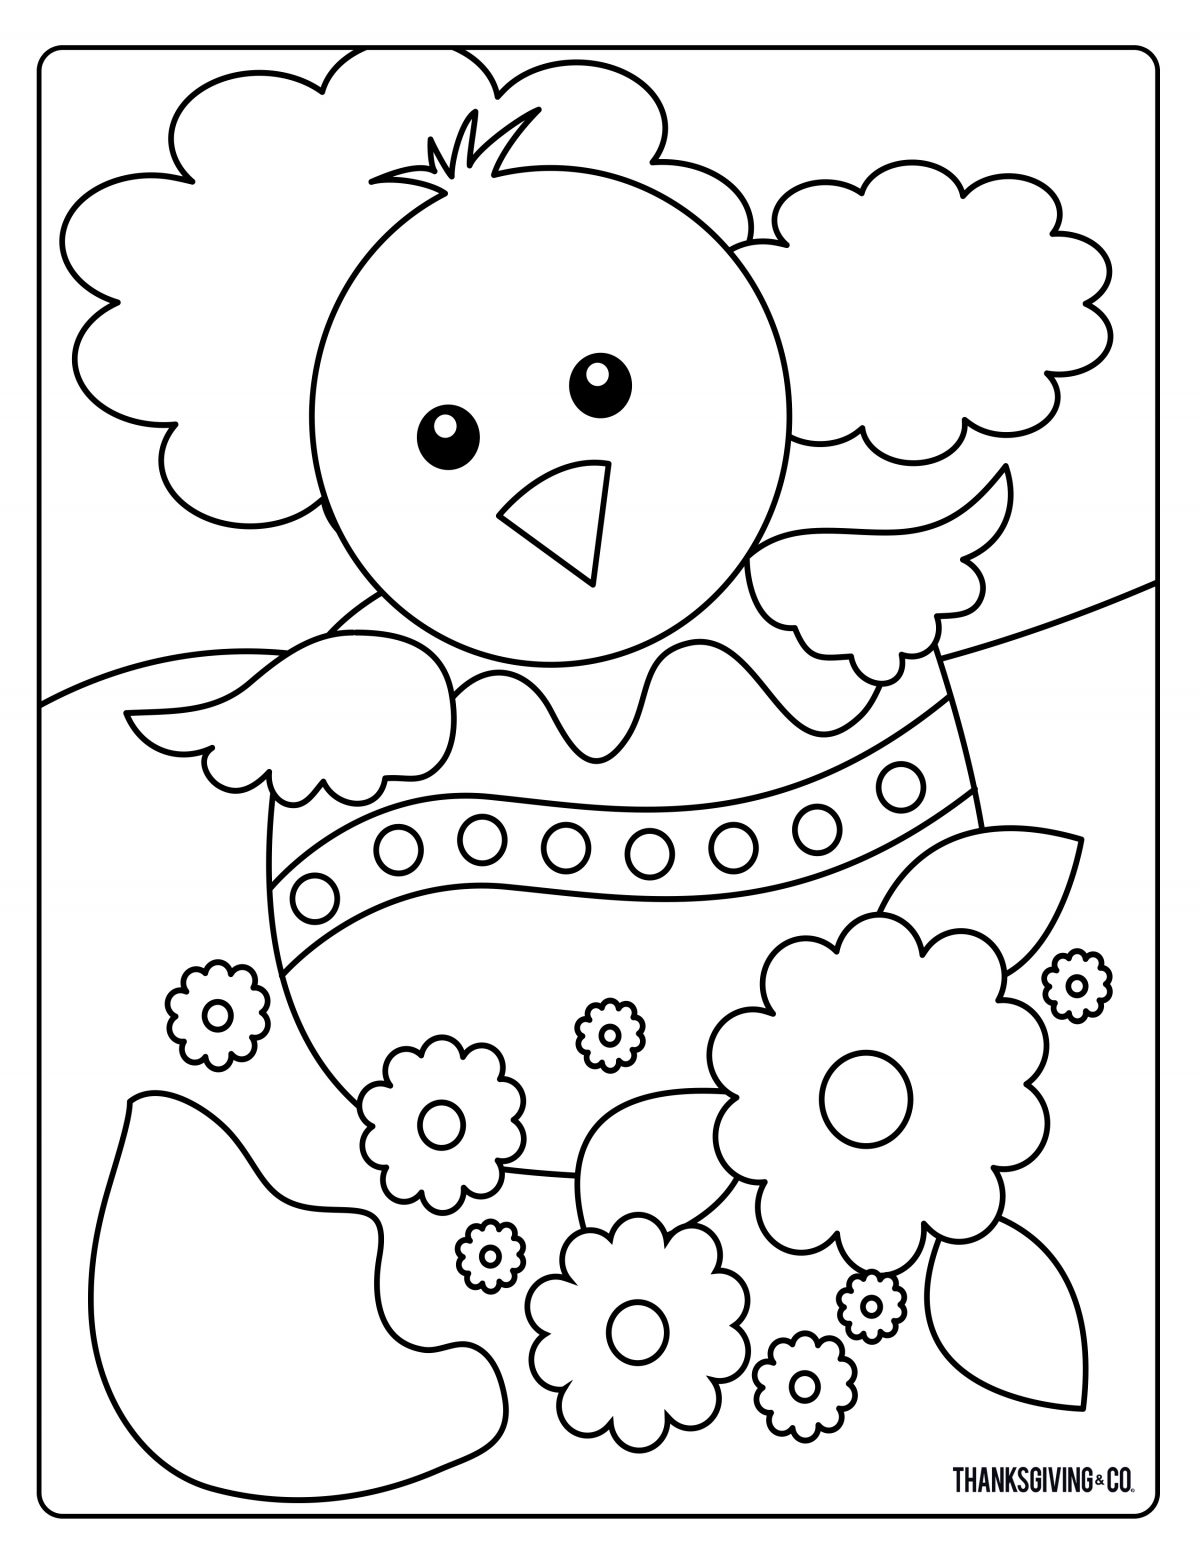 Coloring book page - Egg Chick